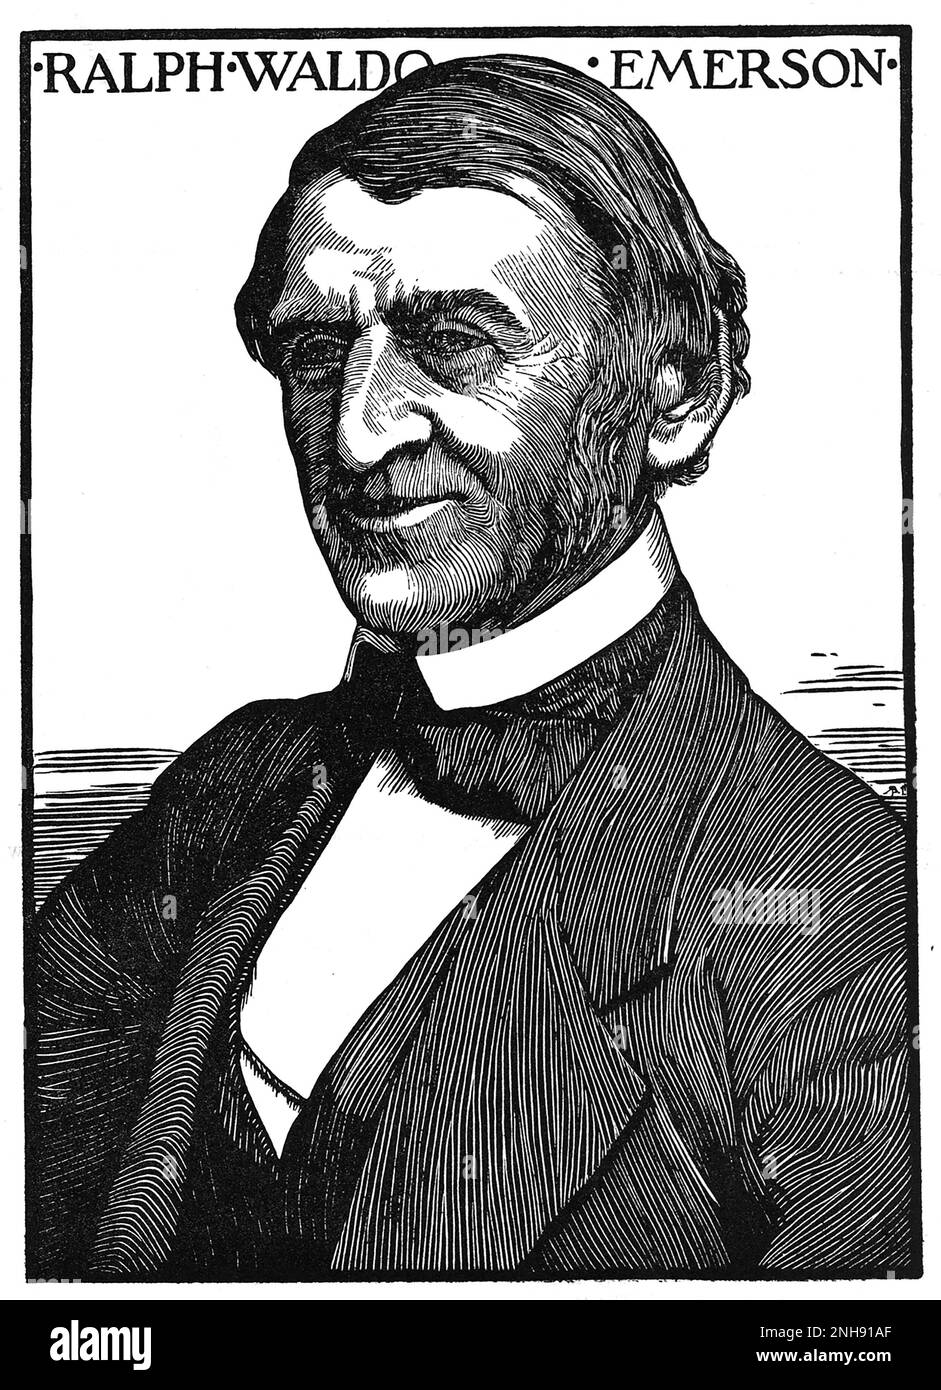 Ralph Waldo Emerson (1803-1882), American essayist, lecturer, philosopher, abolitionist, and poet who led the transcendentalist movement of the mid-19th century. Woodcut by Robert Bryden (1865-1939), a Scots artist and sculptor, 1901. Stock Photo